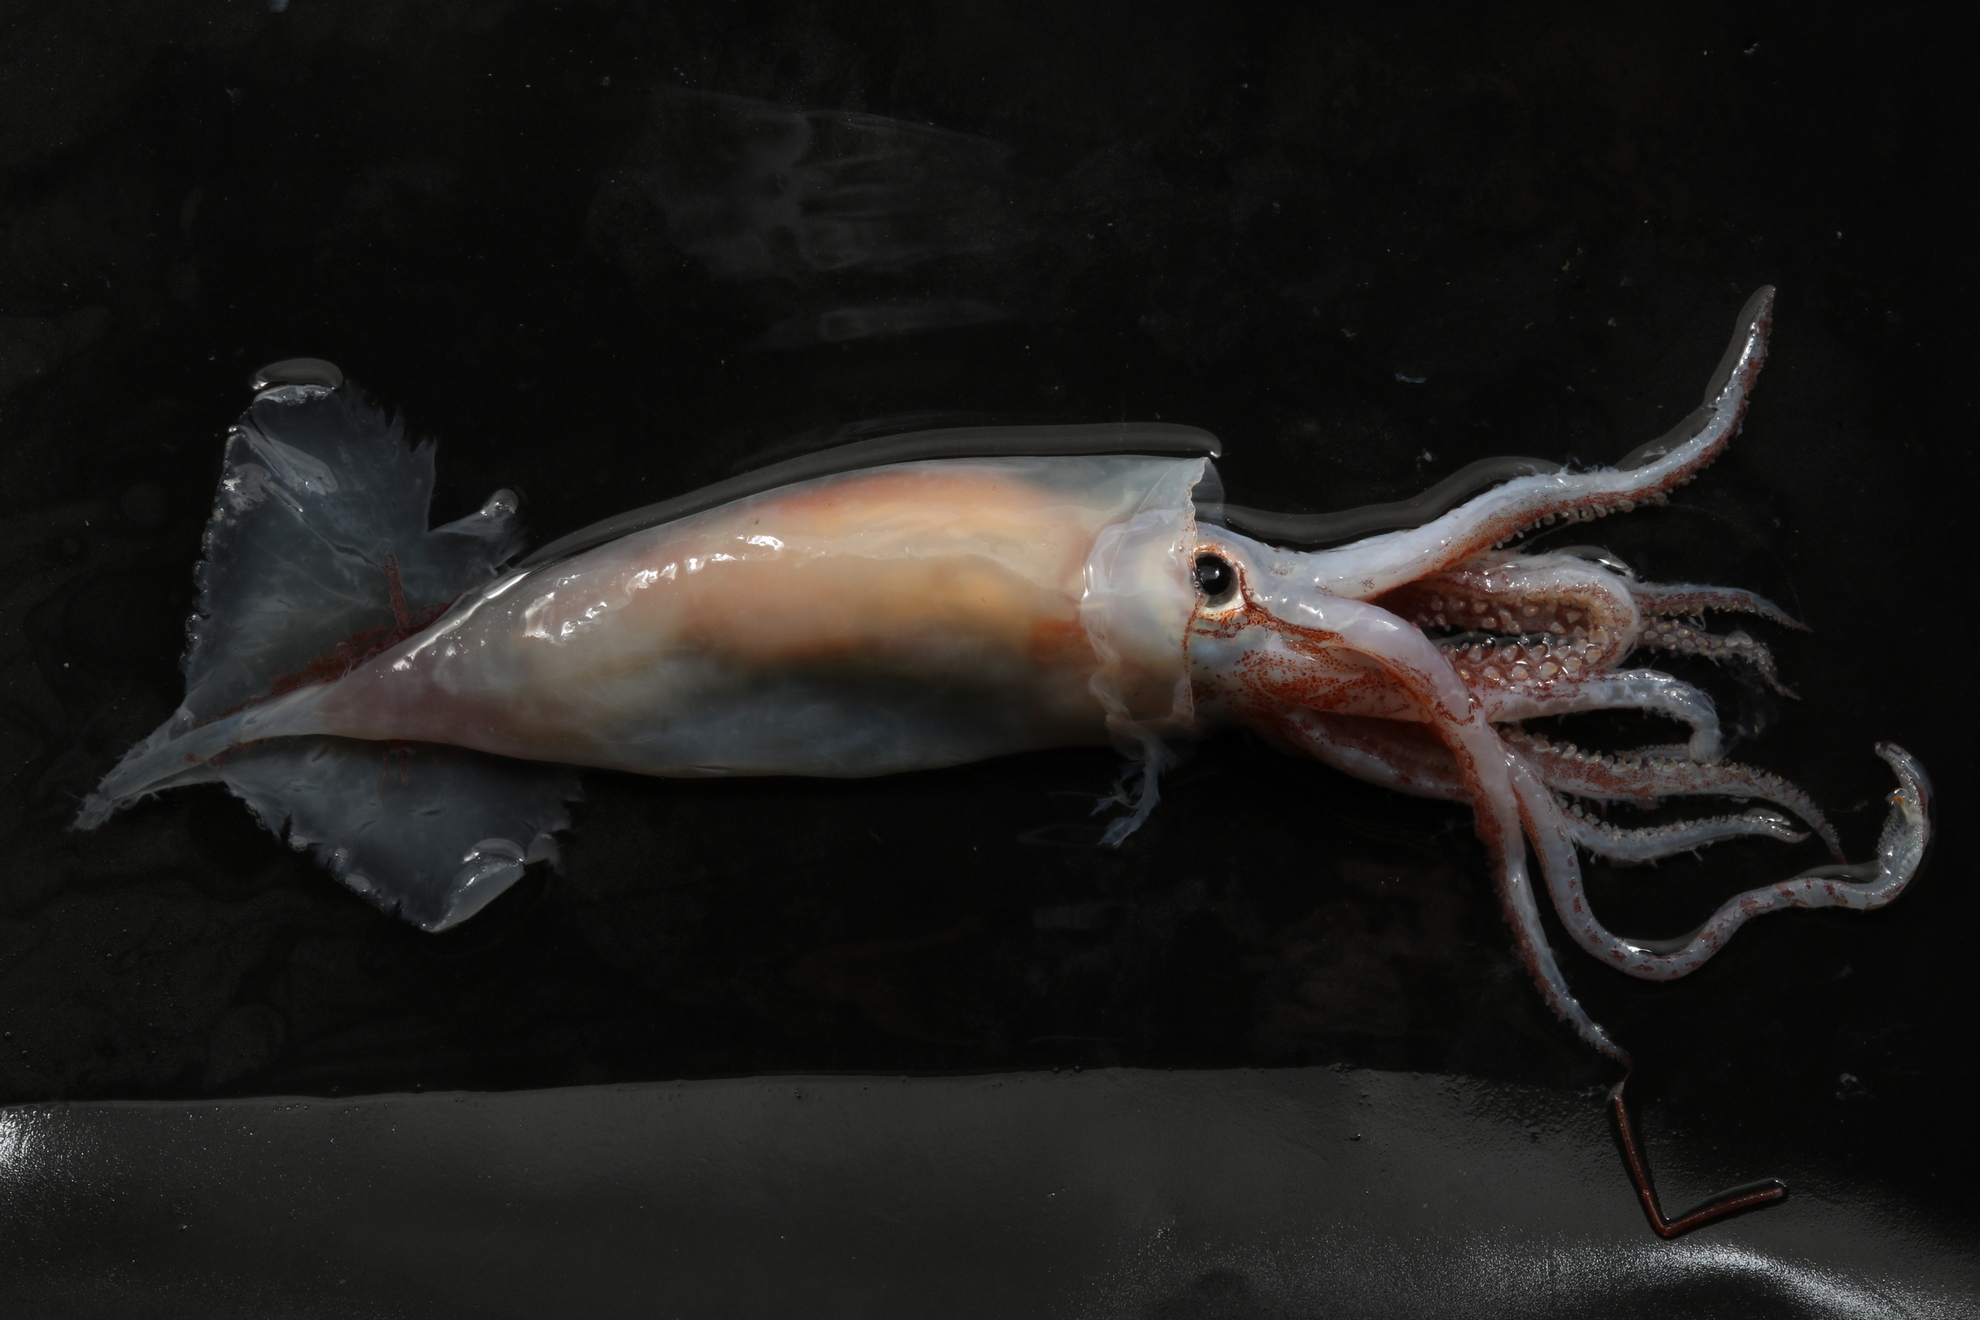 Scientists are studying squids to understand how they are affected by climate change. © Olga Zimina